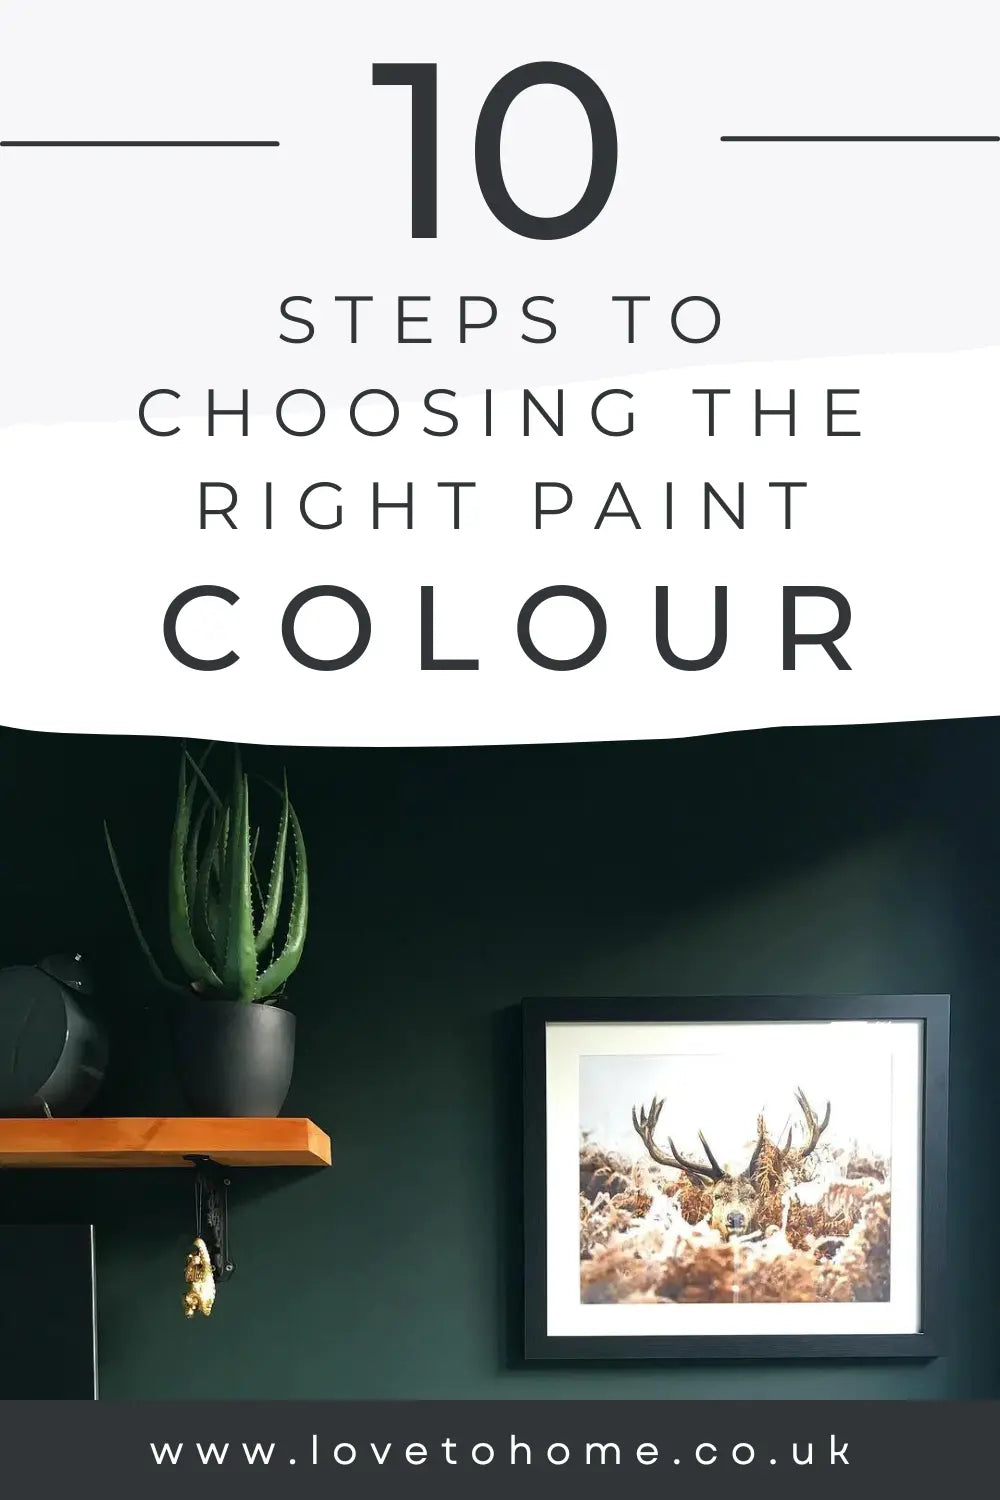 Stuck on choosing a paint colour for your home? Try these 10 simple steps and nail it - www.lovetohome.co.uk